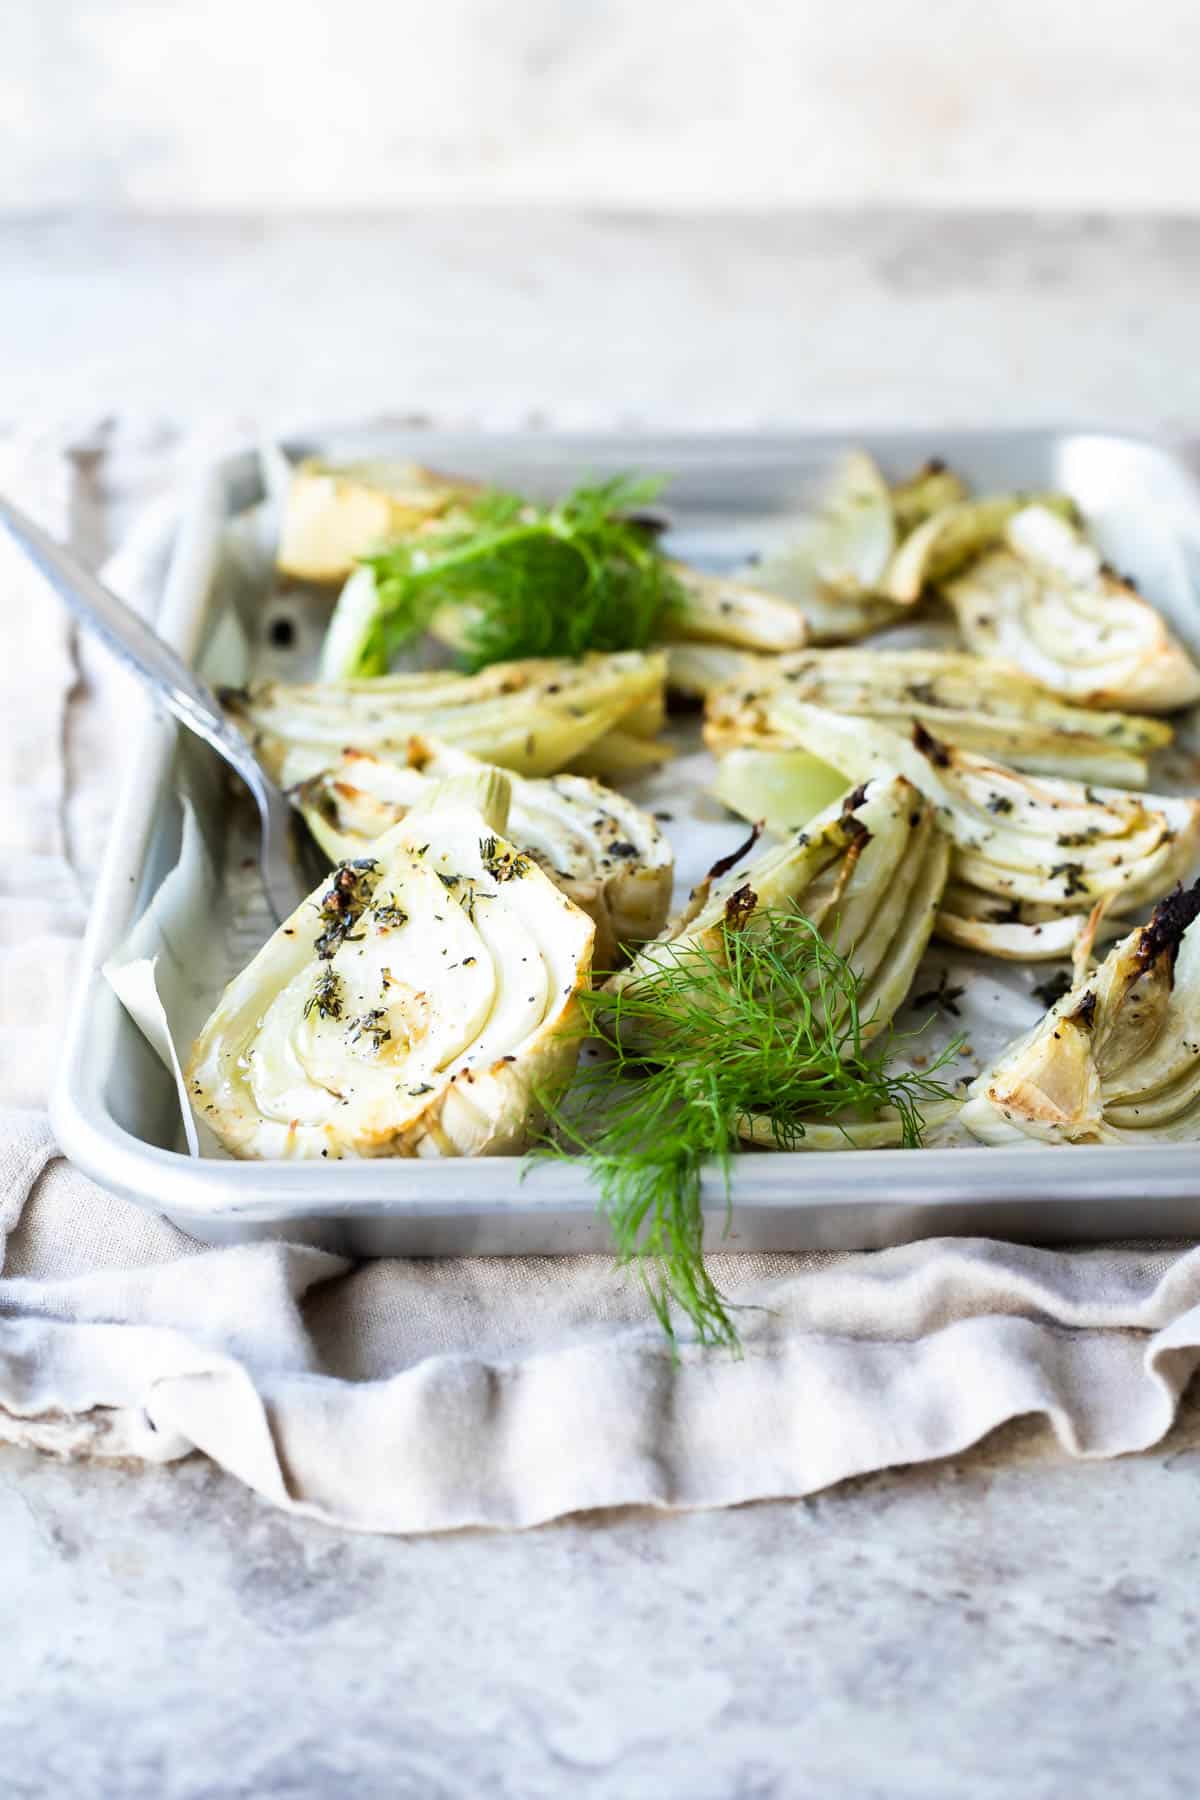 Roasted fennel on a parchment paper lined baking sheet.